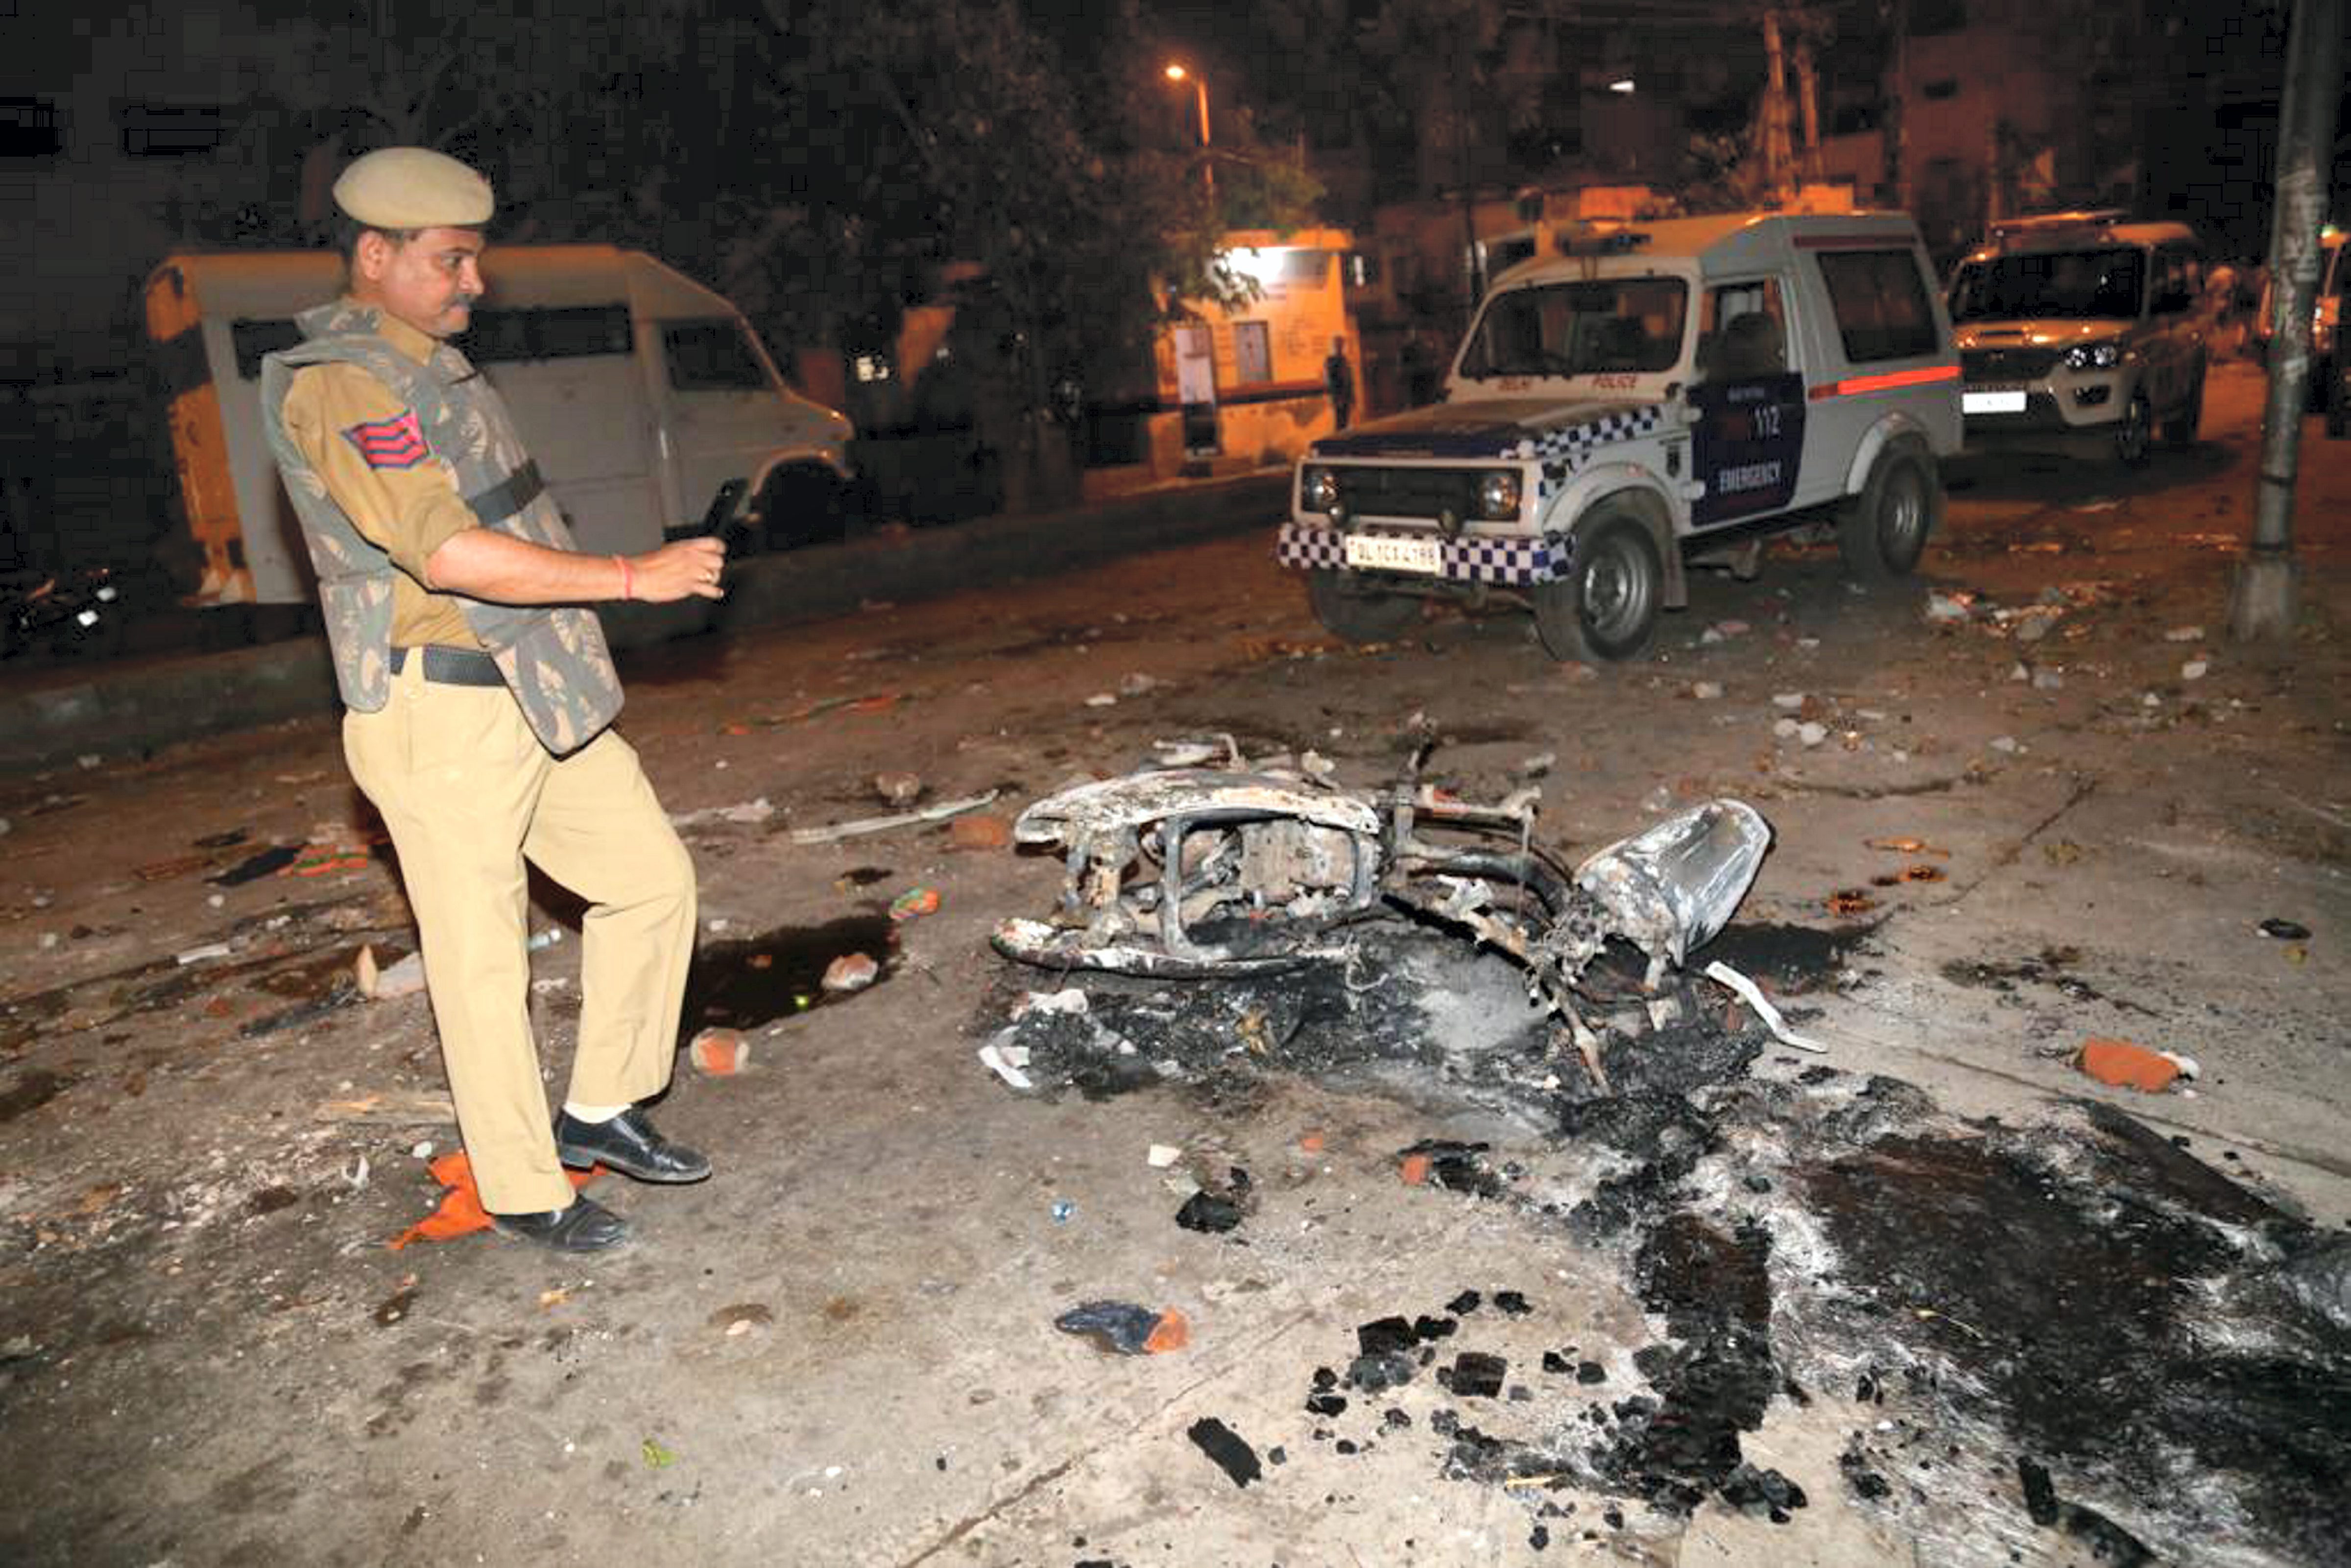 Cops injured, vehicles torched as violence breaks out during Hanuman Jayanti procession in Delhi's Jahangirpuri